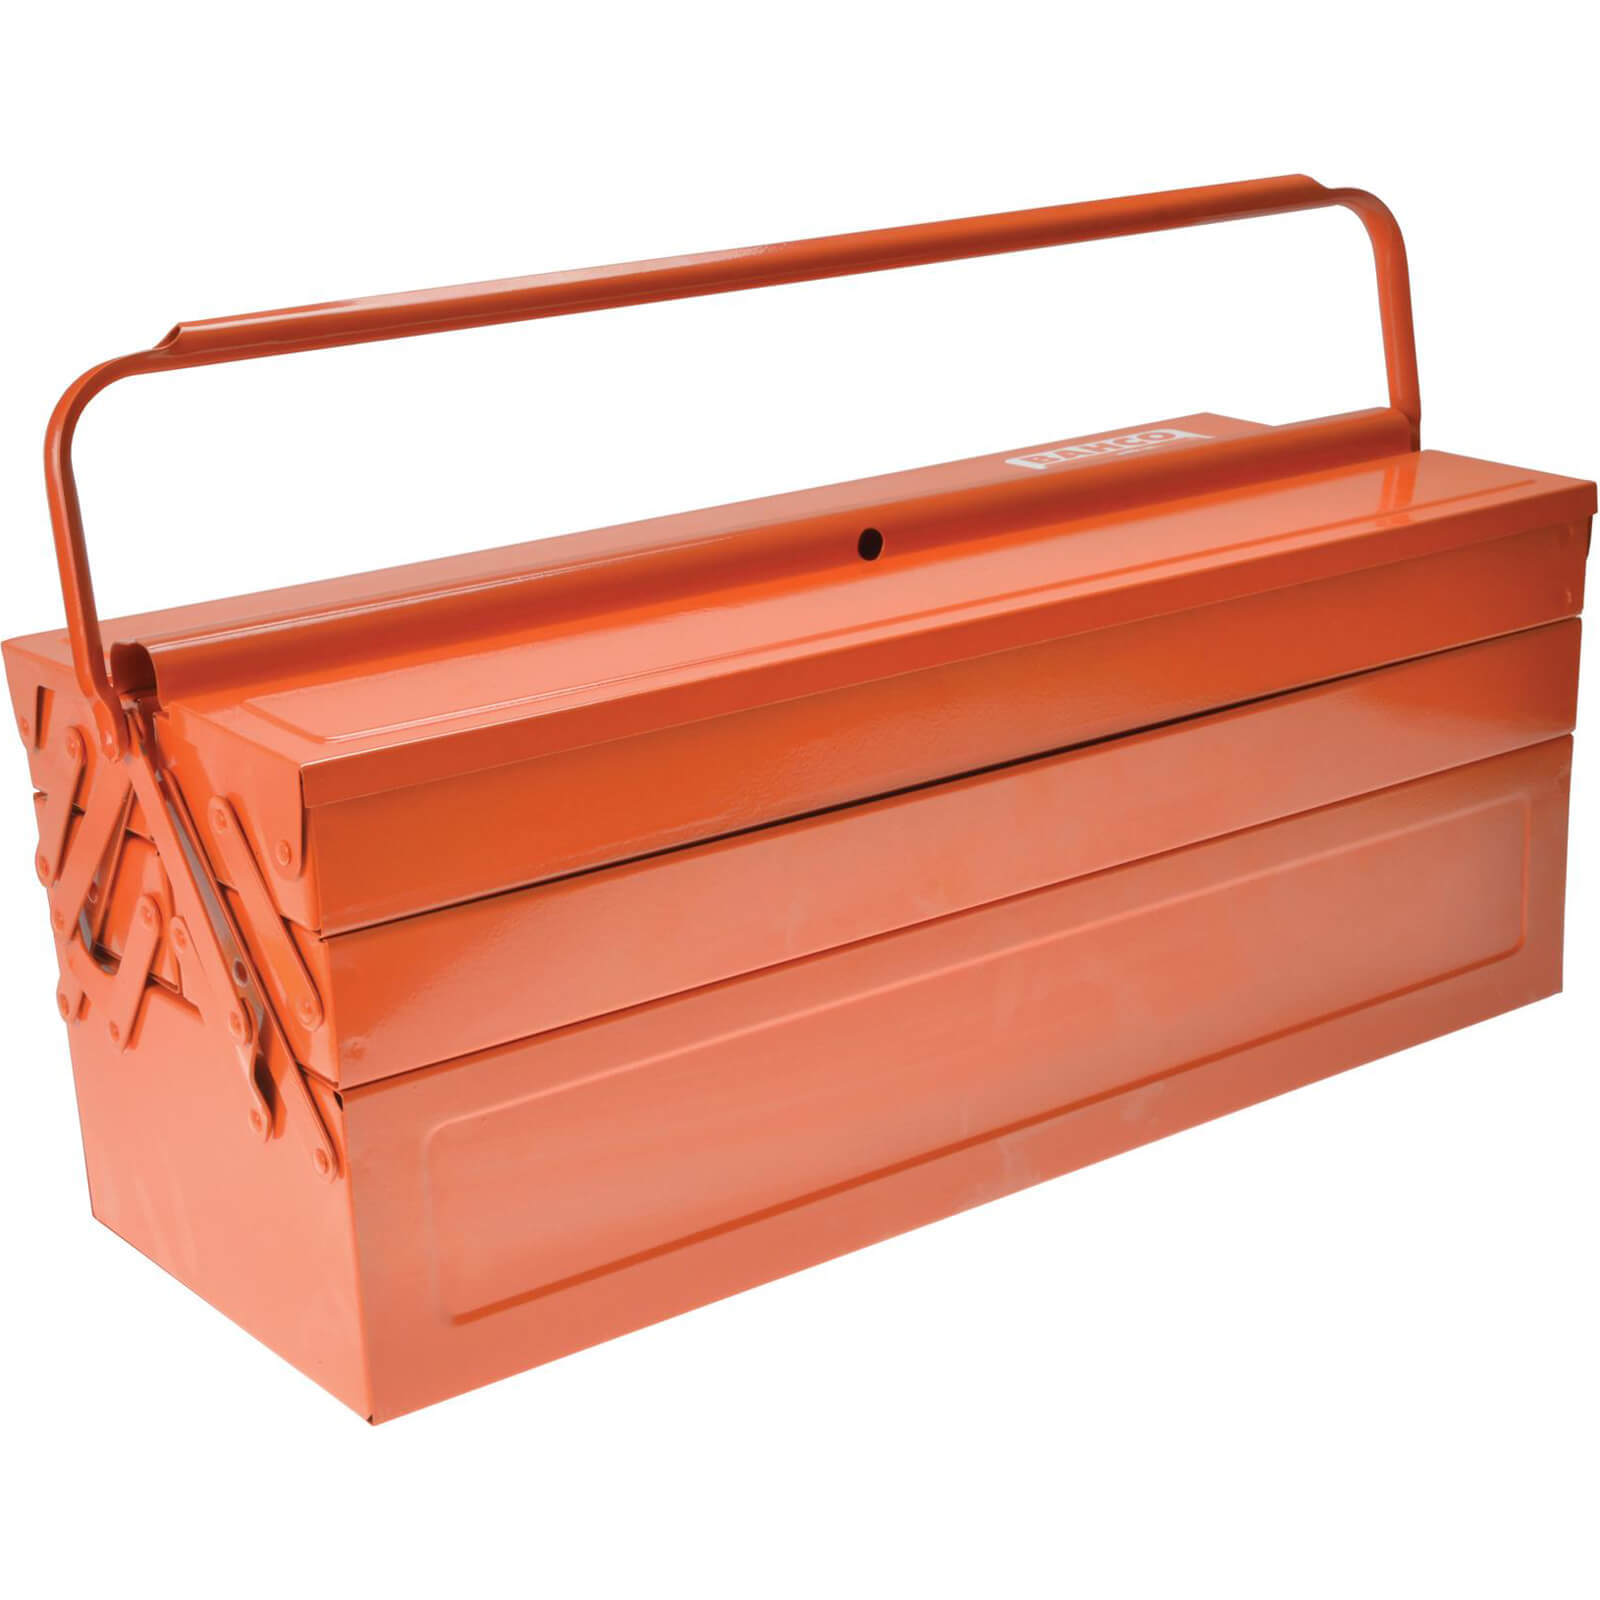 Image of Bahco Metal Cantilever Tool Box with 5 Trays Orange 22" / 550mm